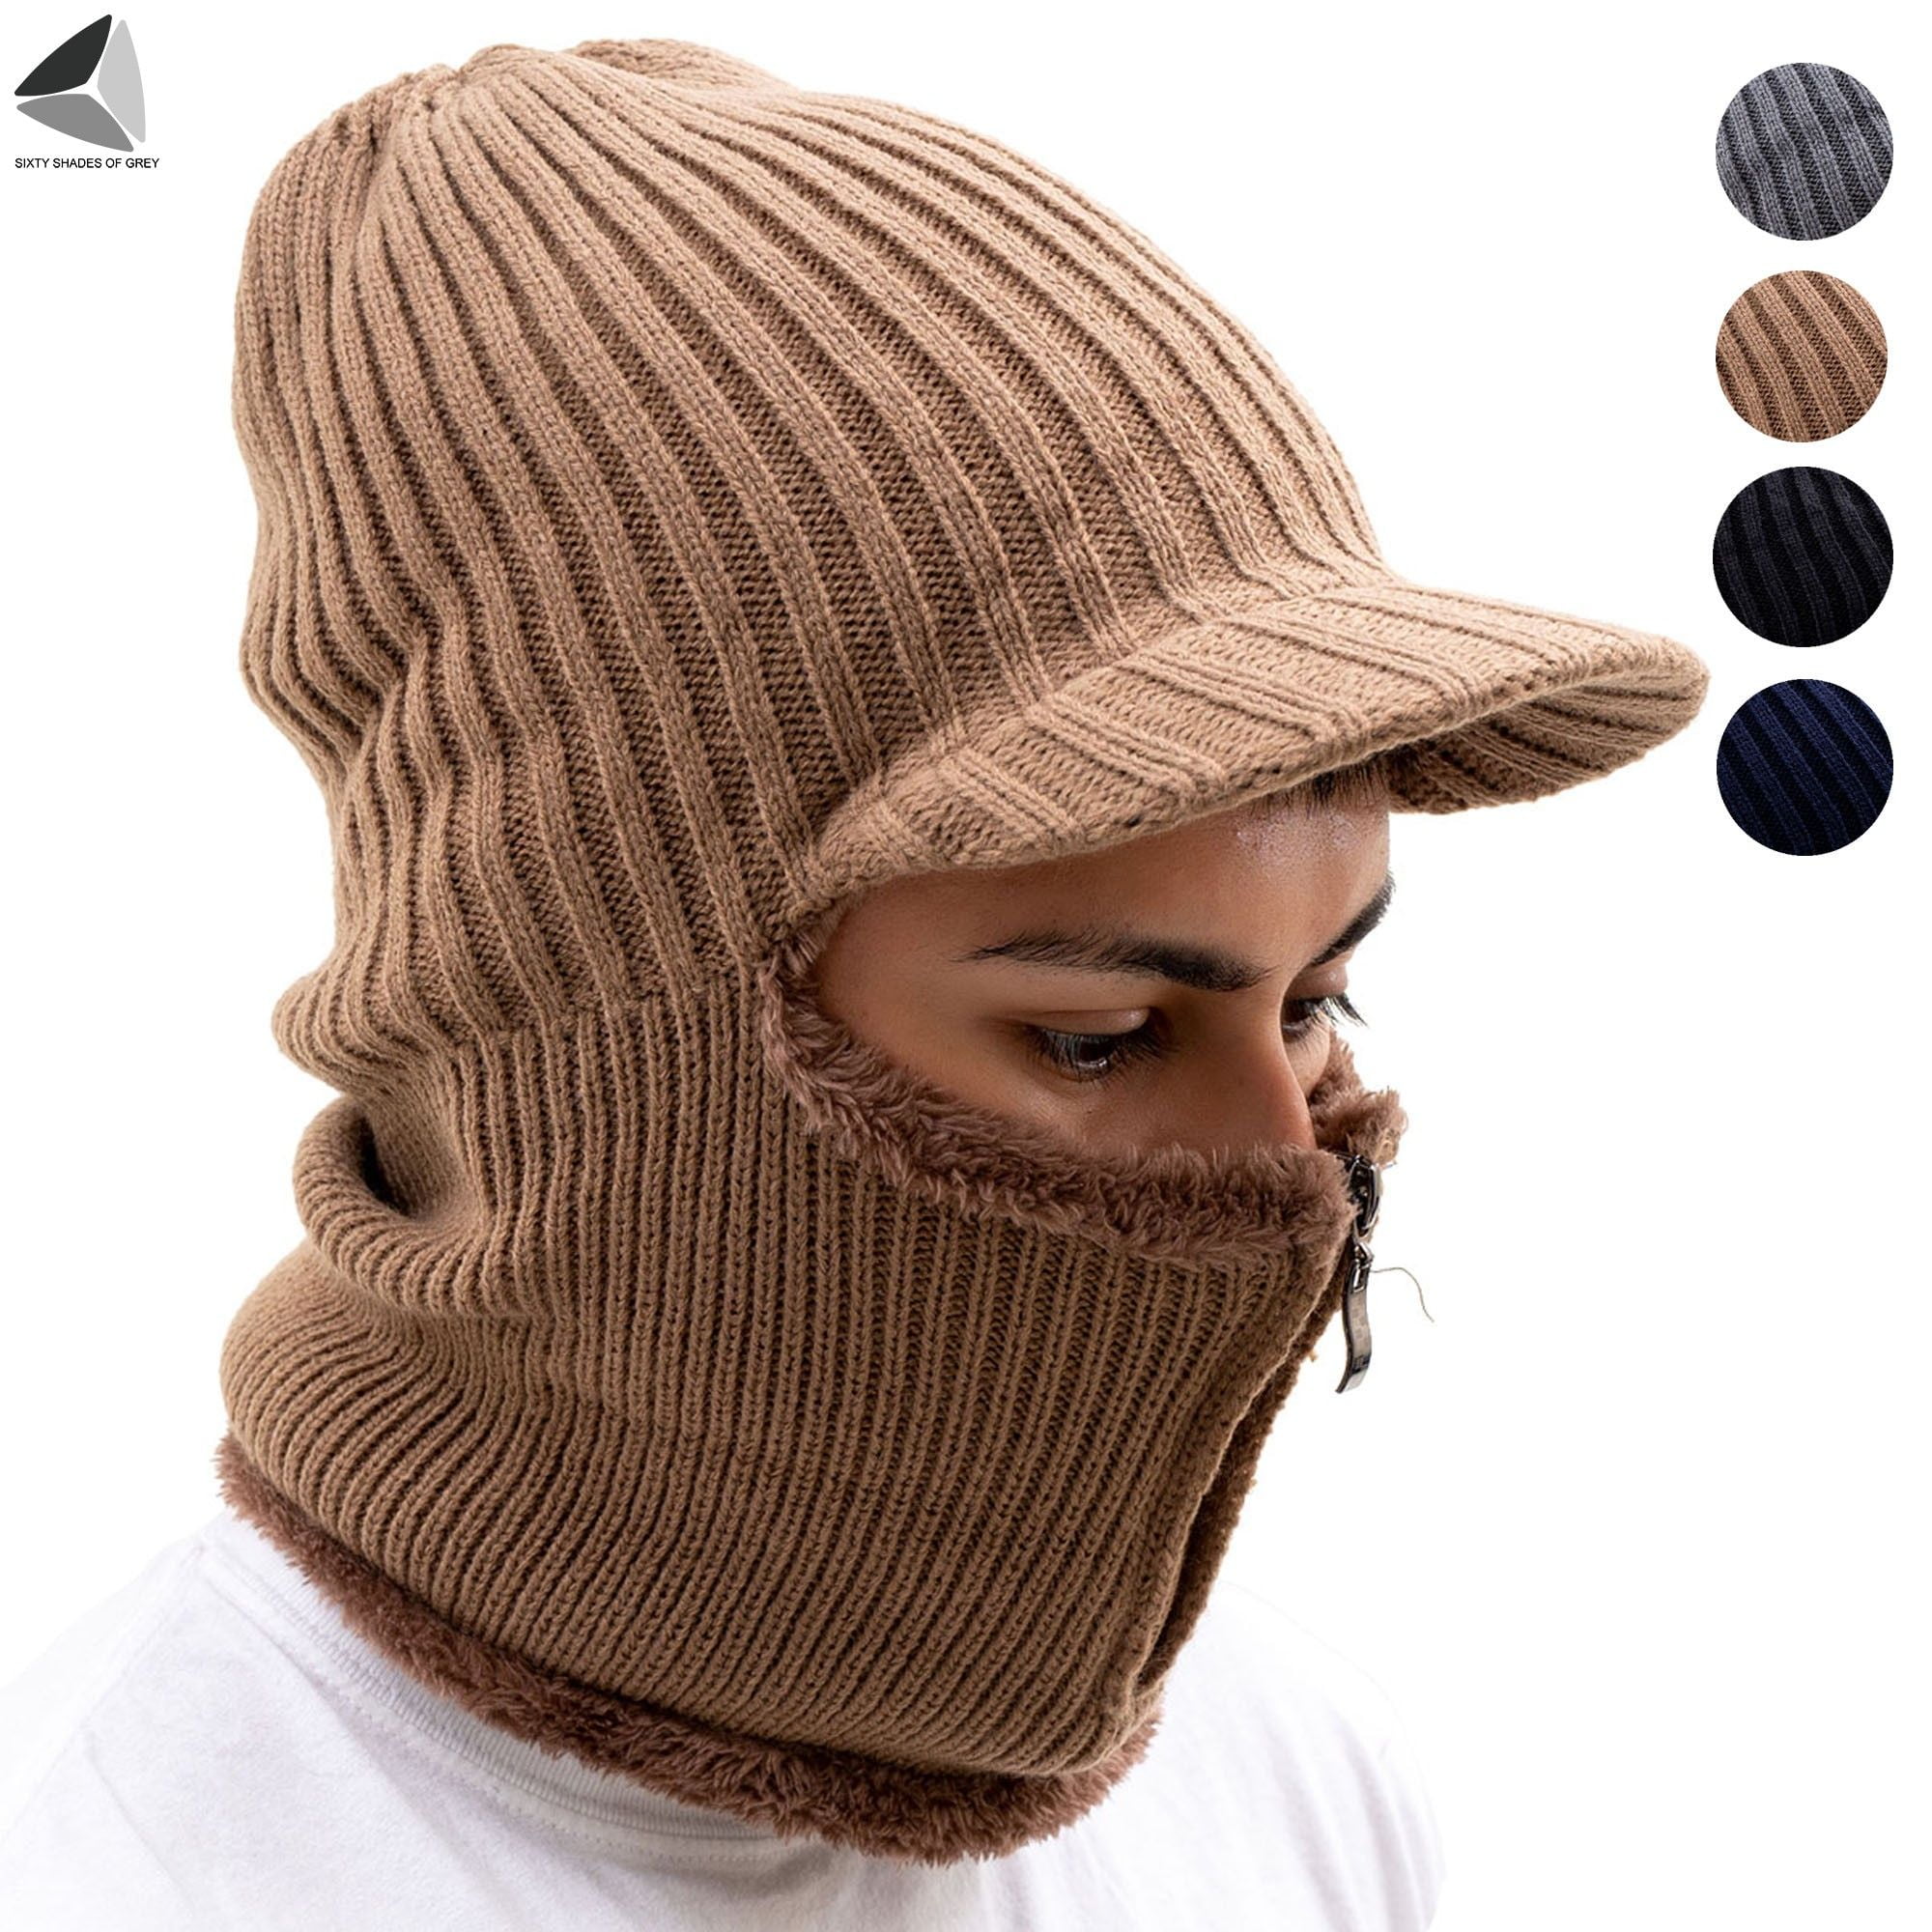 PULLIMORE Winter 3 In 1 Beanie Knit Hats for Women Men Fleece Lined Warm  Skull Caps with Zipper Face Mask and Ear Flap for Cycling Skiing Running